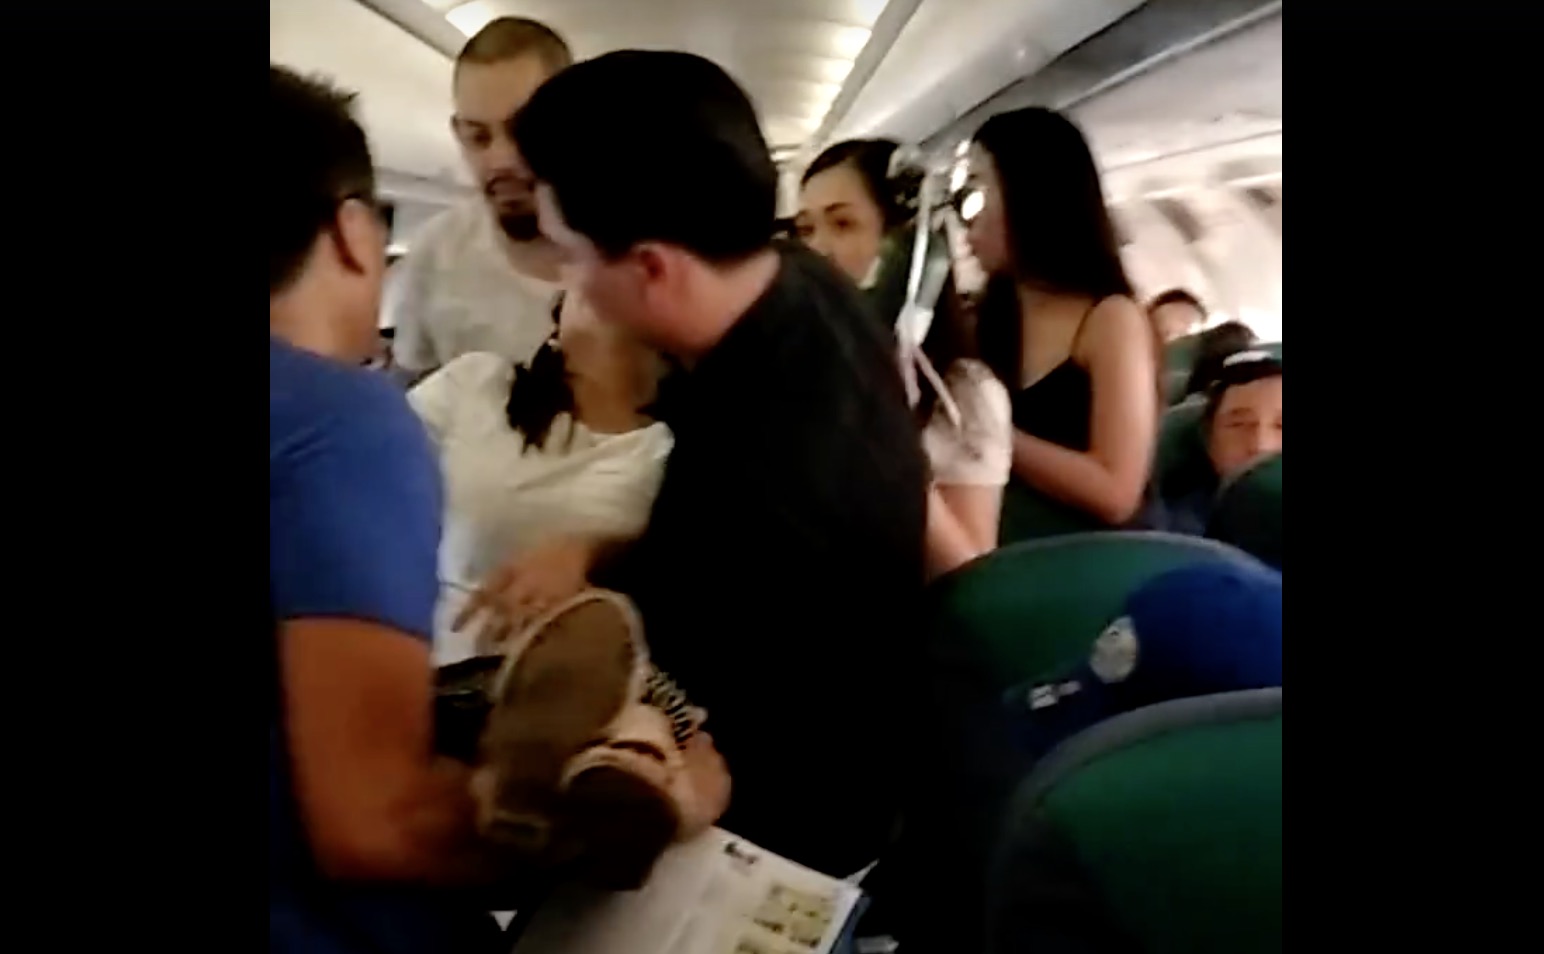 A woman passed out inside a “freakin’ hot” Cebu Pacific flight. PHOTO: Screengrab from Gin Durano’s Facebook video